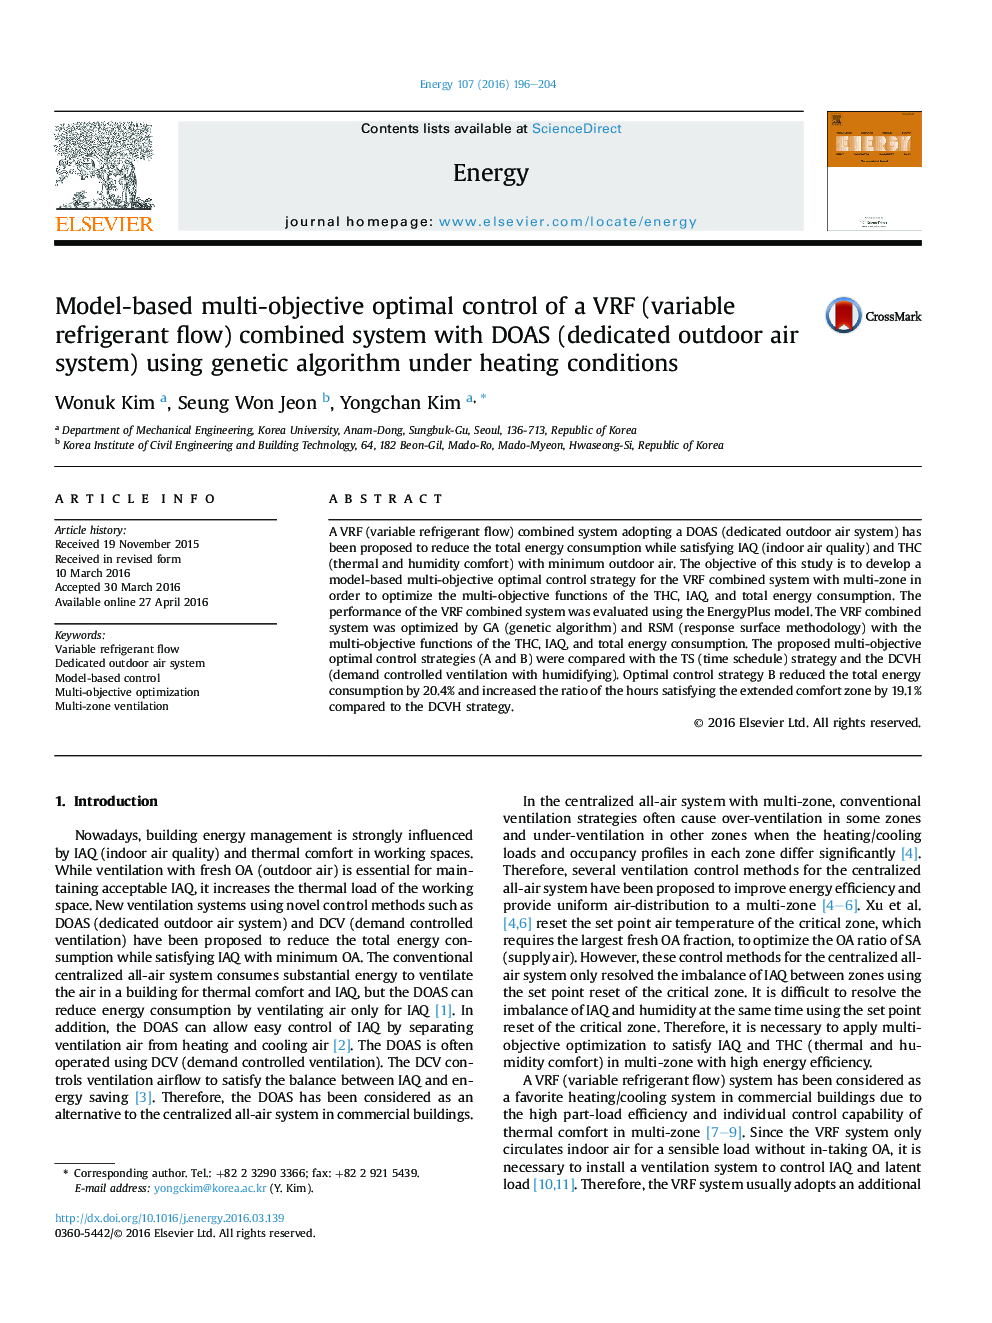 Model-based multi-objective optimal control of a VRF (variable refrigerant flow) combined system with DOAS (dedicated outdoor air system) using genetic algorithm under heating conditions